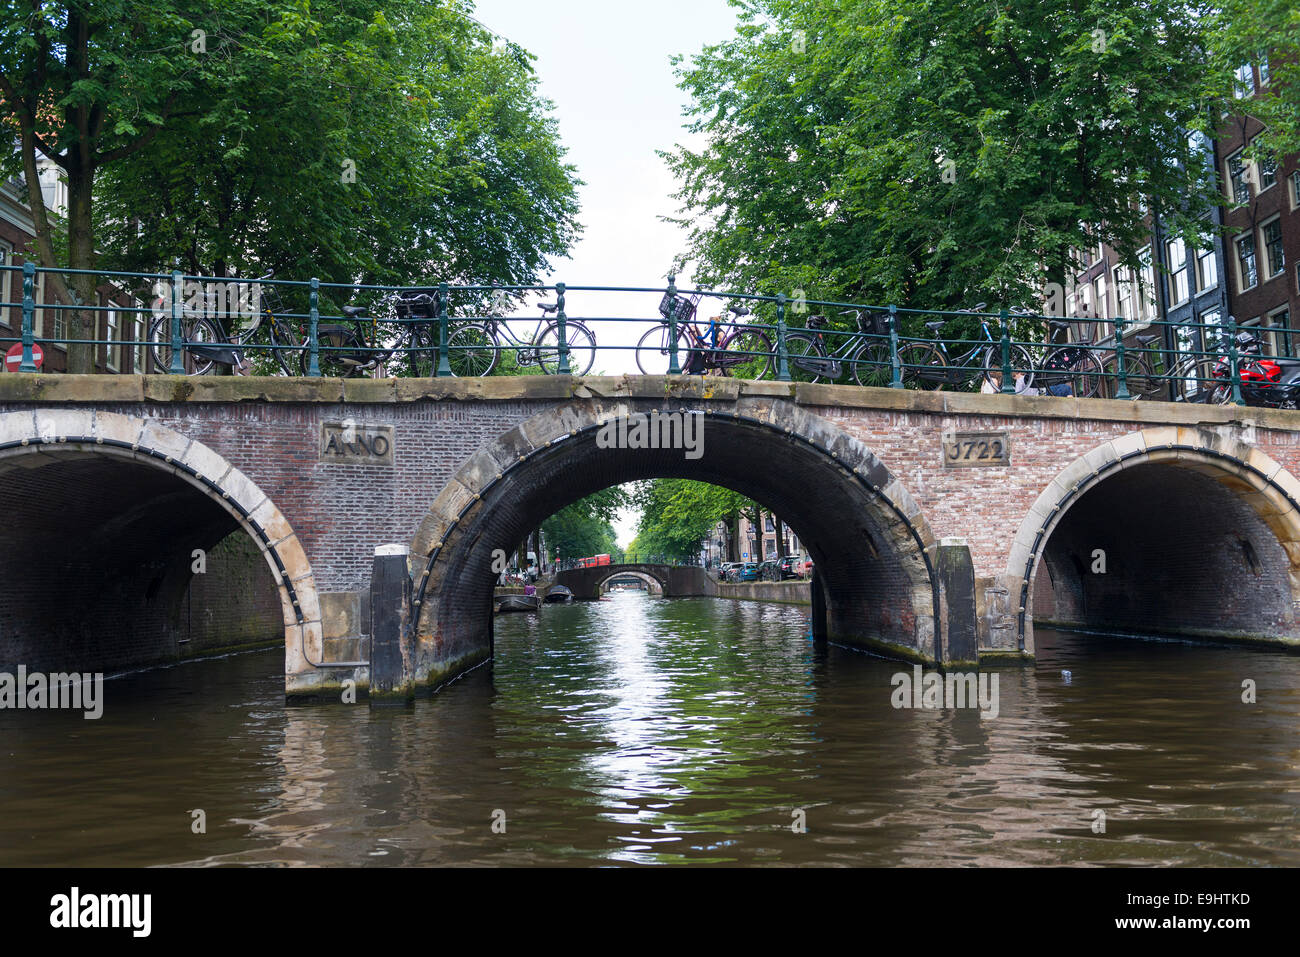 The Five bridges over the Reguliersgracht canal in Amsterdam, Holland Stock Photo